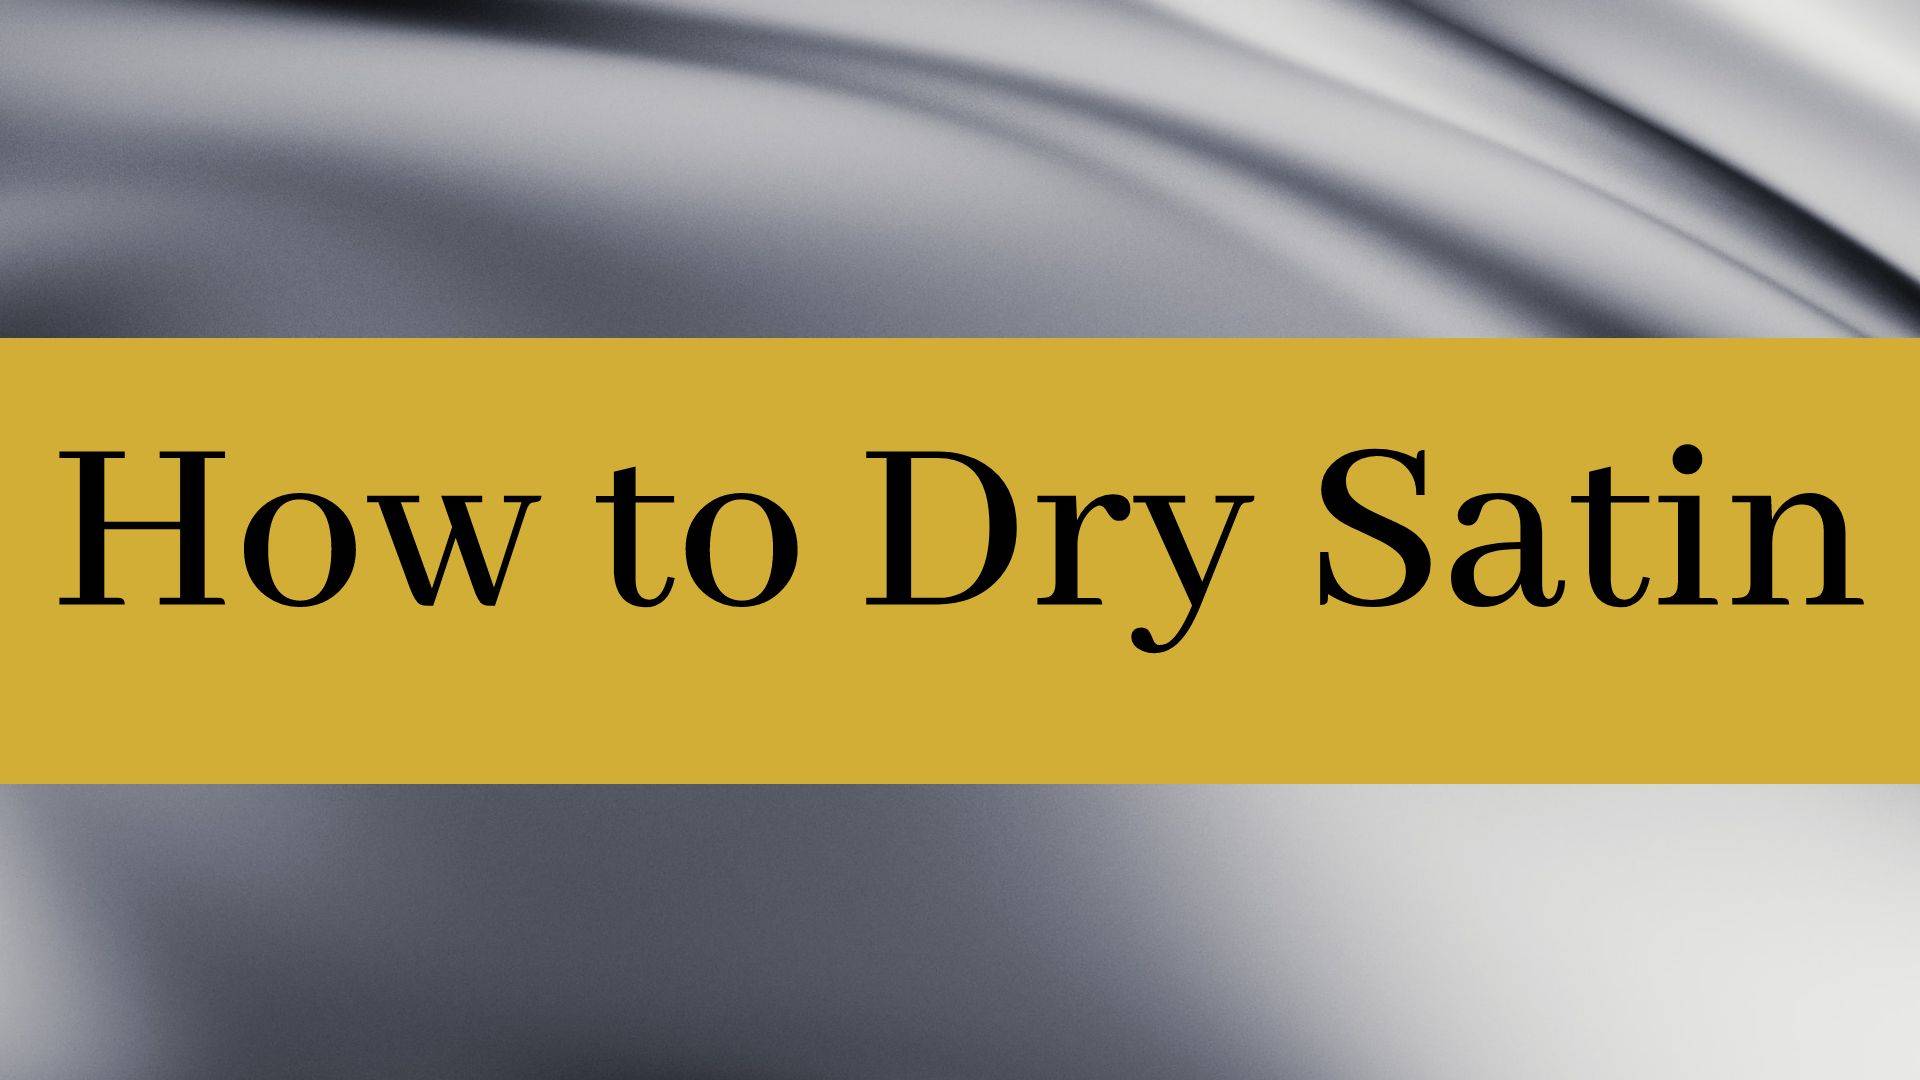 how to dry satin header image